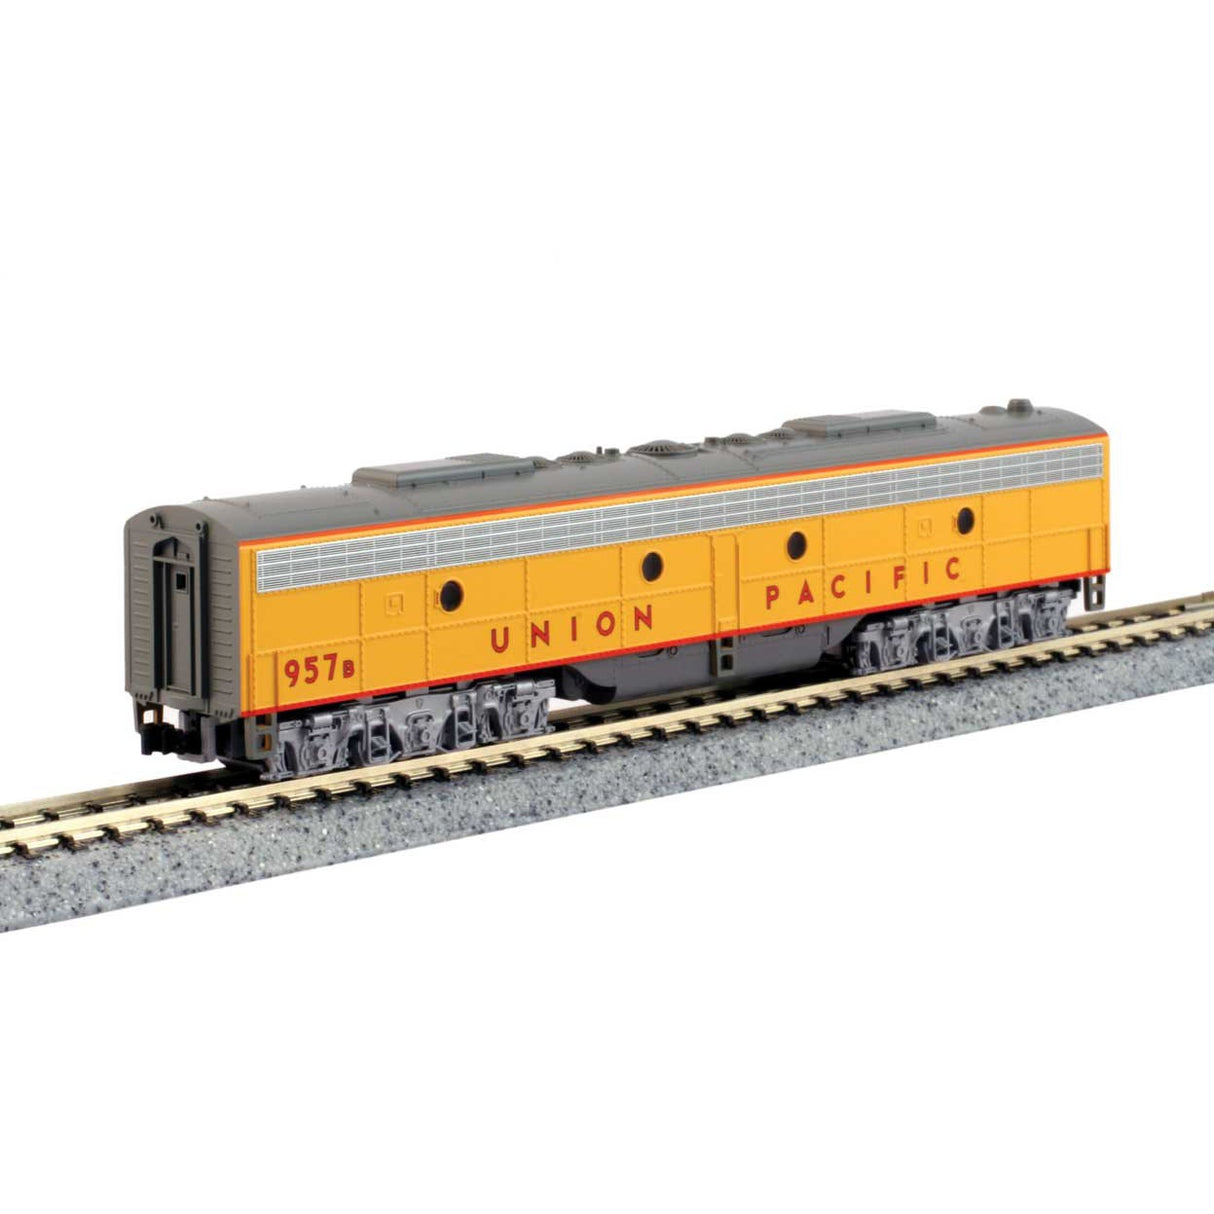 Kato N Scale E8B Diesel UP Union Pacific #947B City of Los Angeles